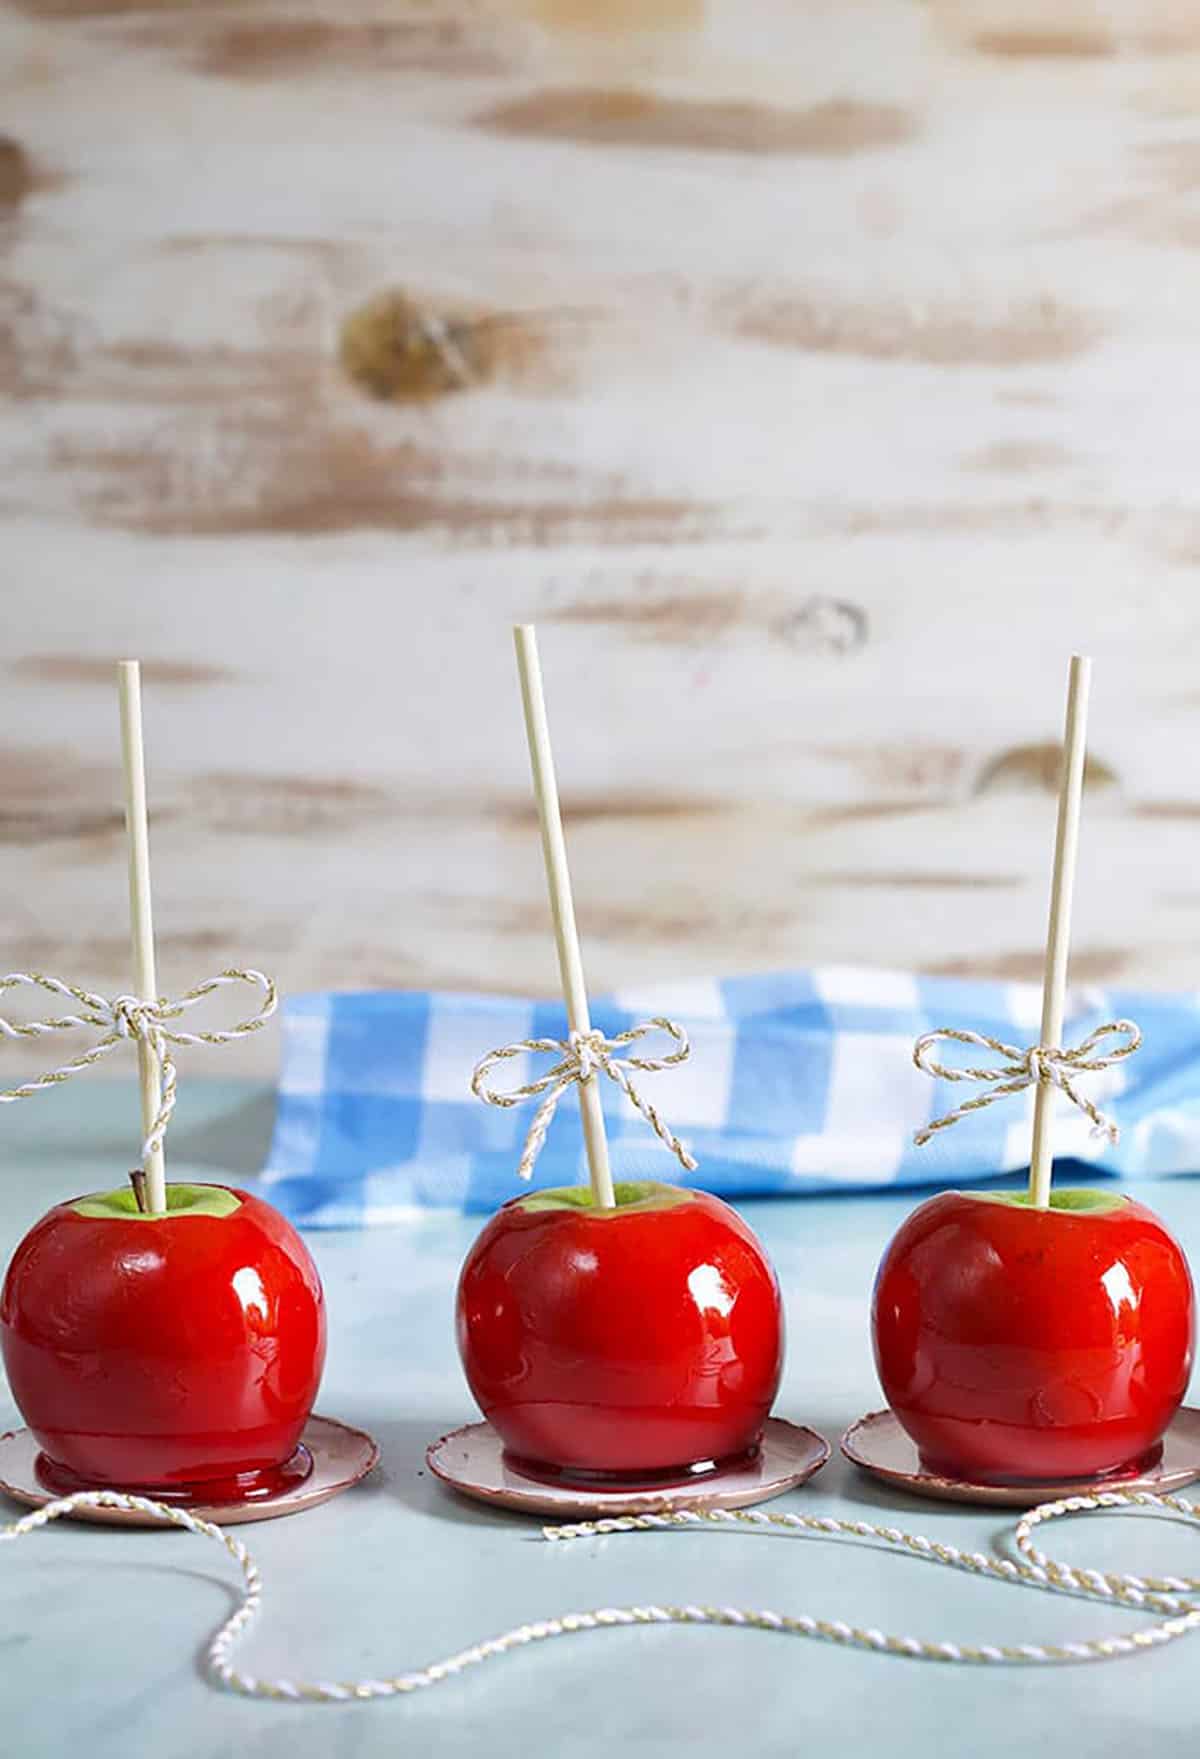 Three candy apples in a row on a blue background.